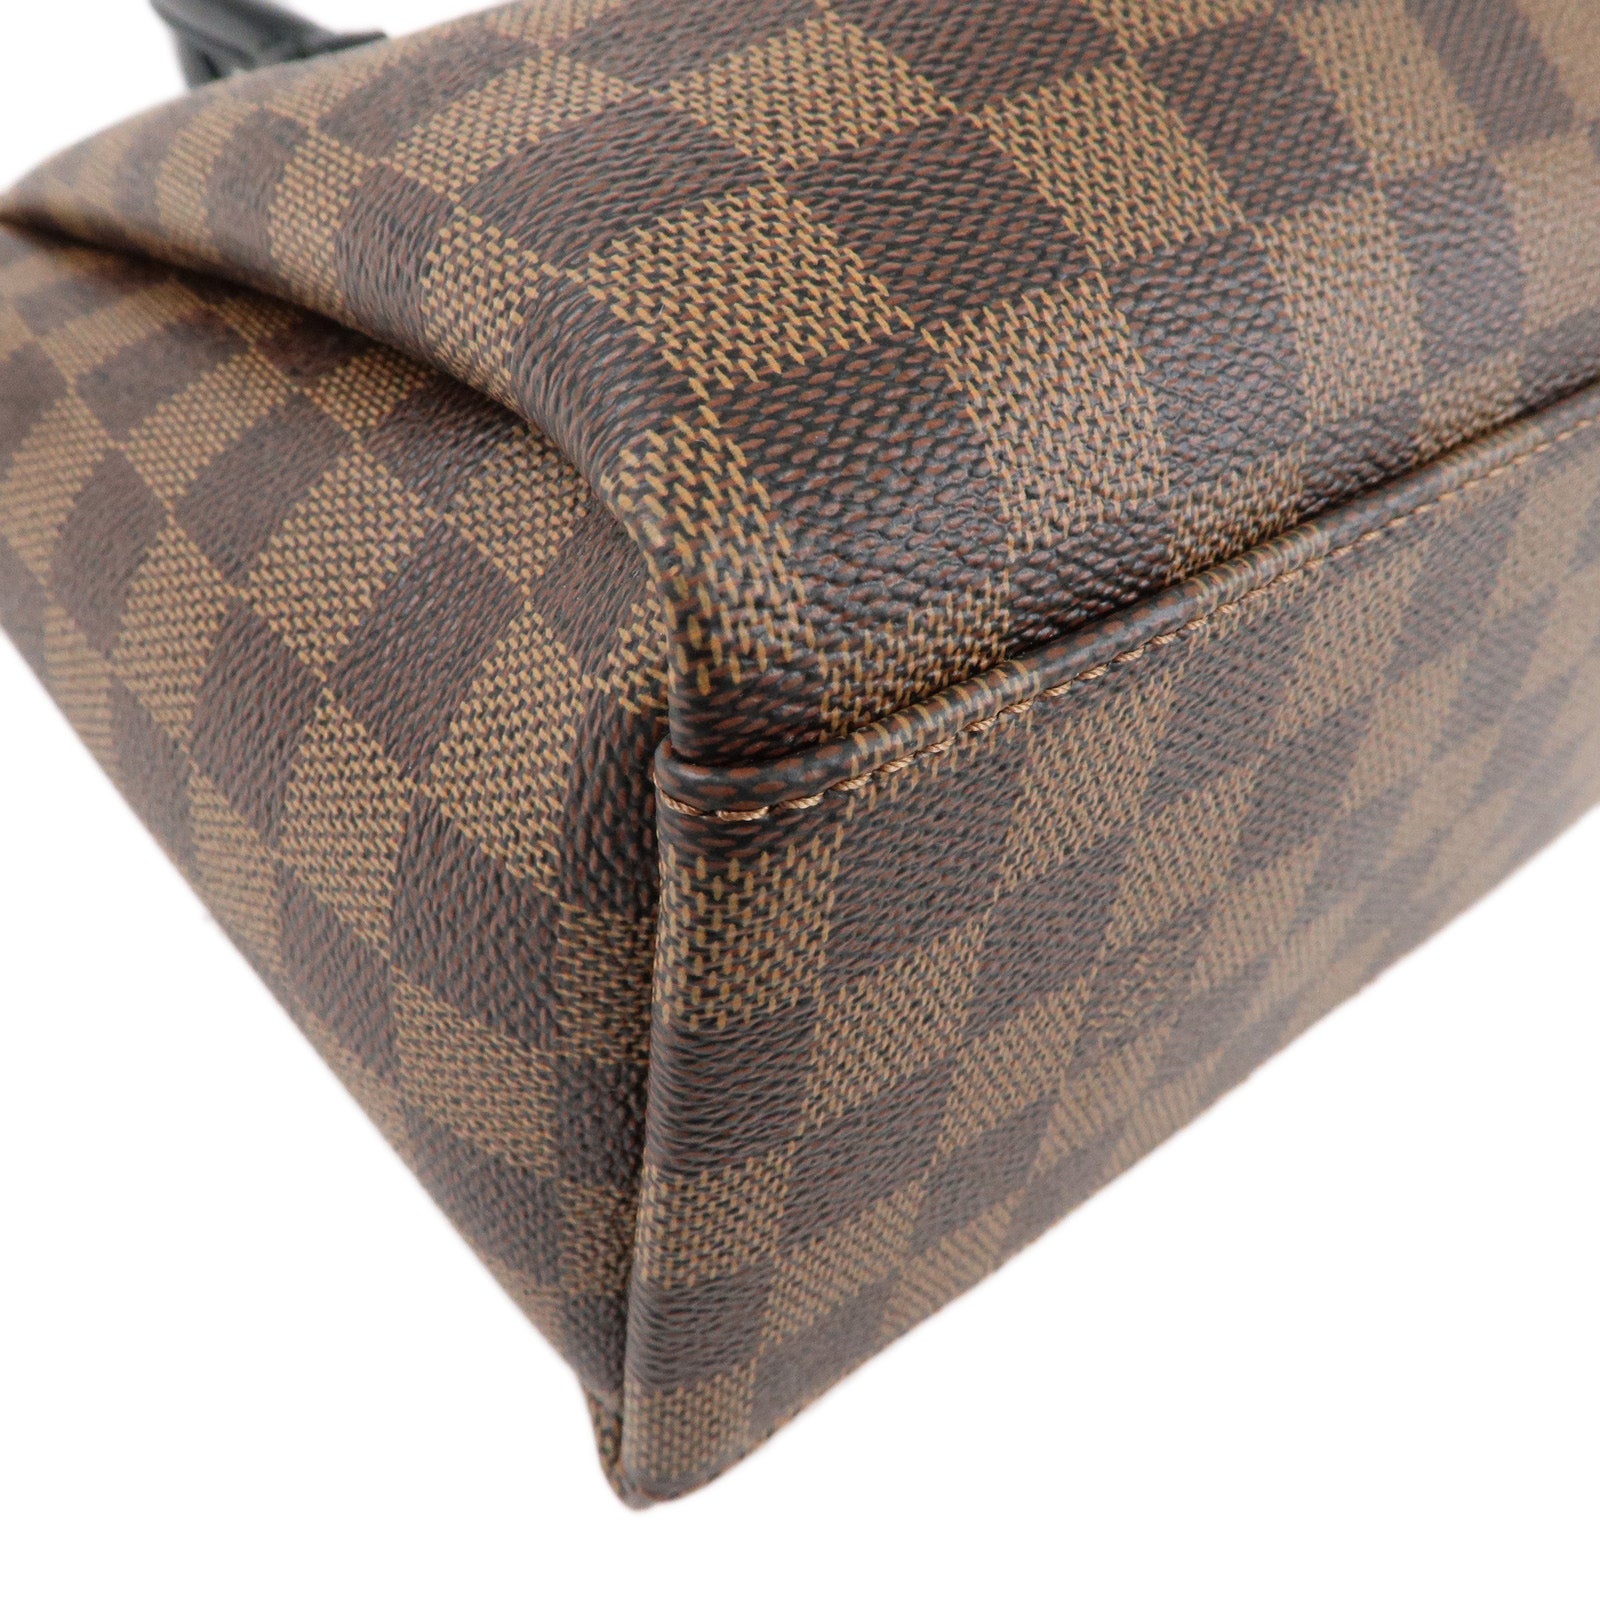 Louis Vuitton Odeon Tote PM N45282 Brown - lushenticbags